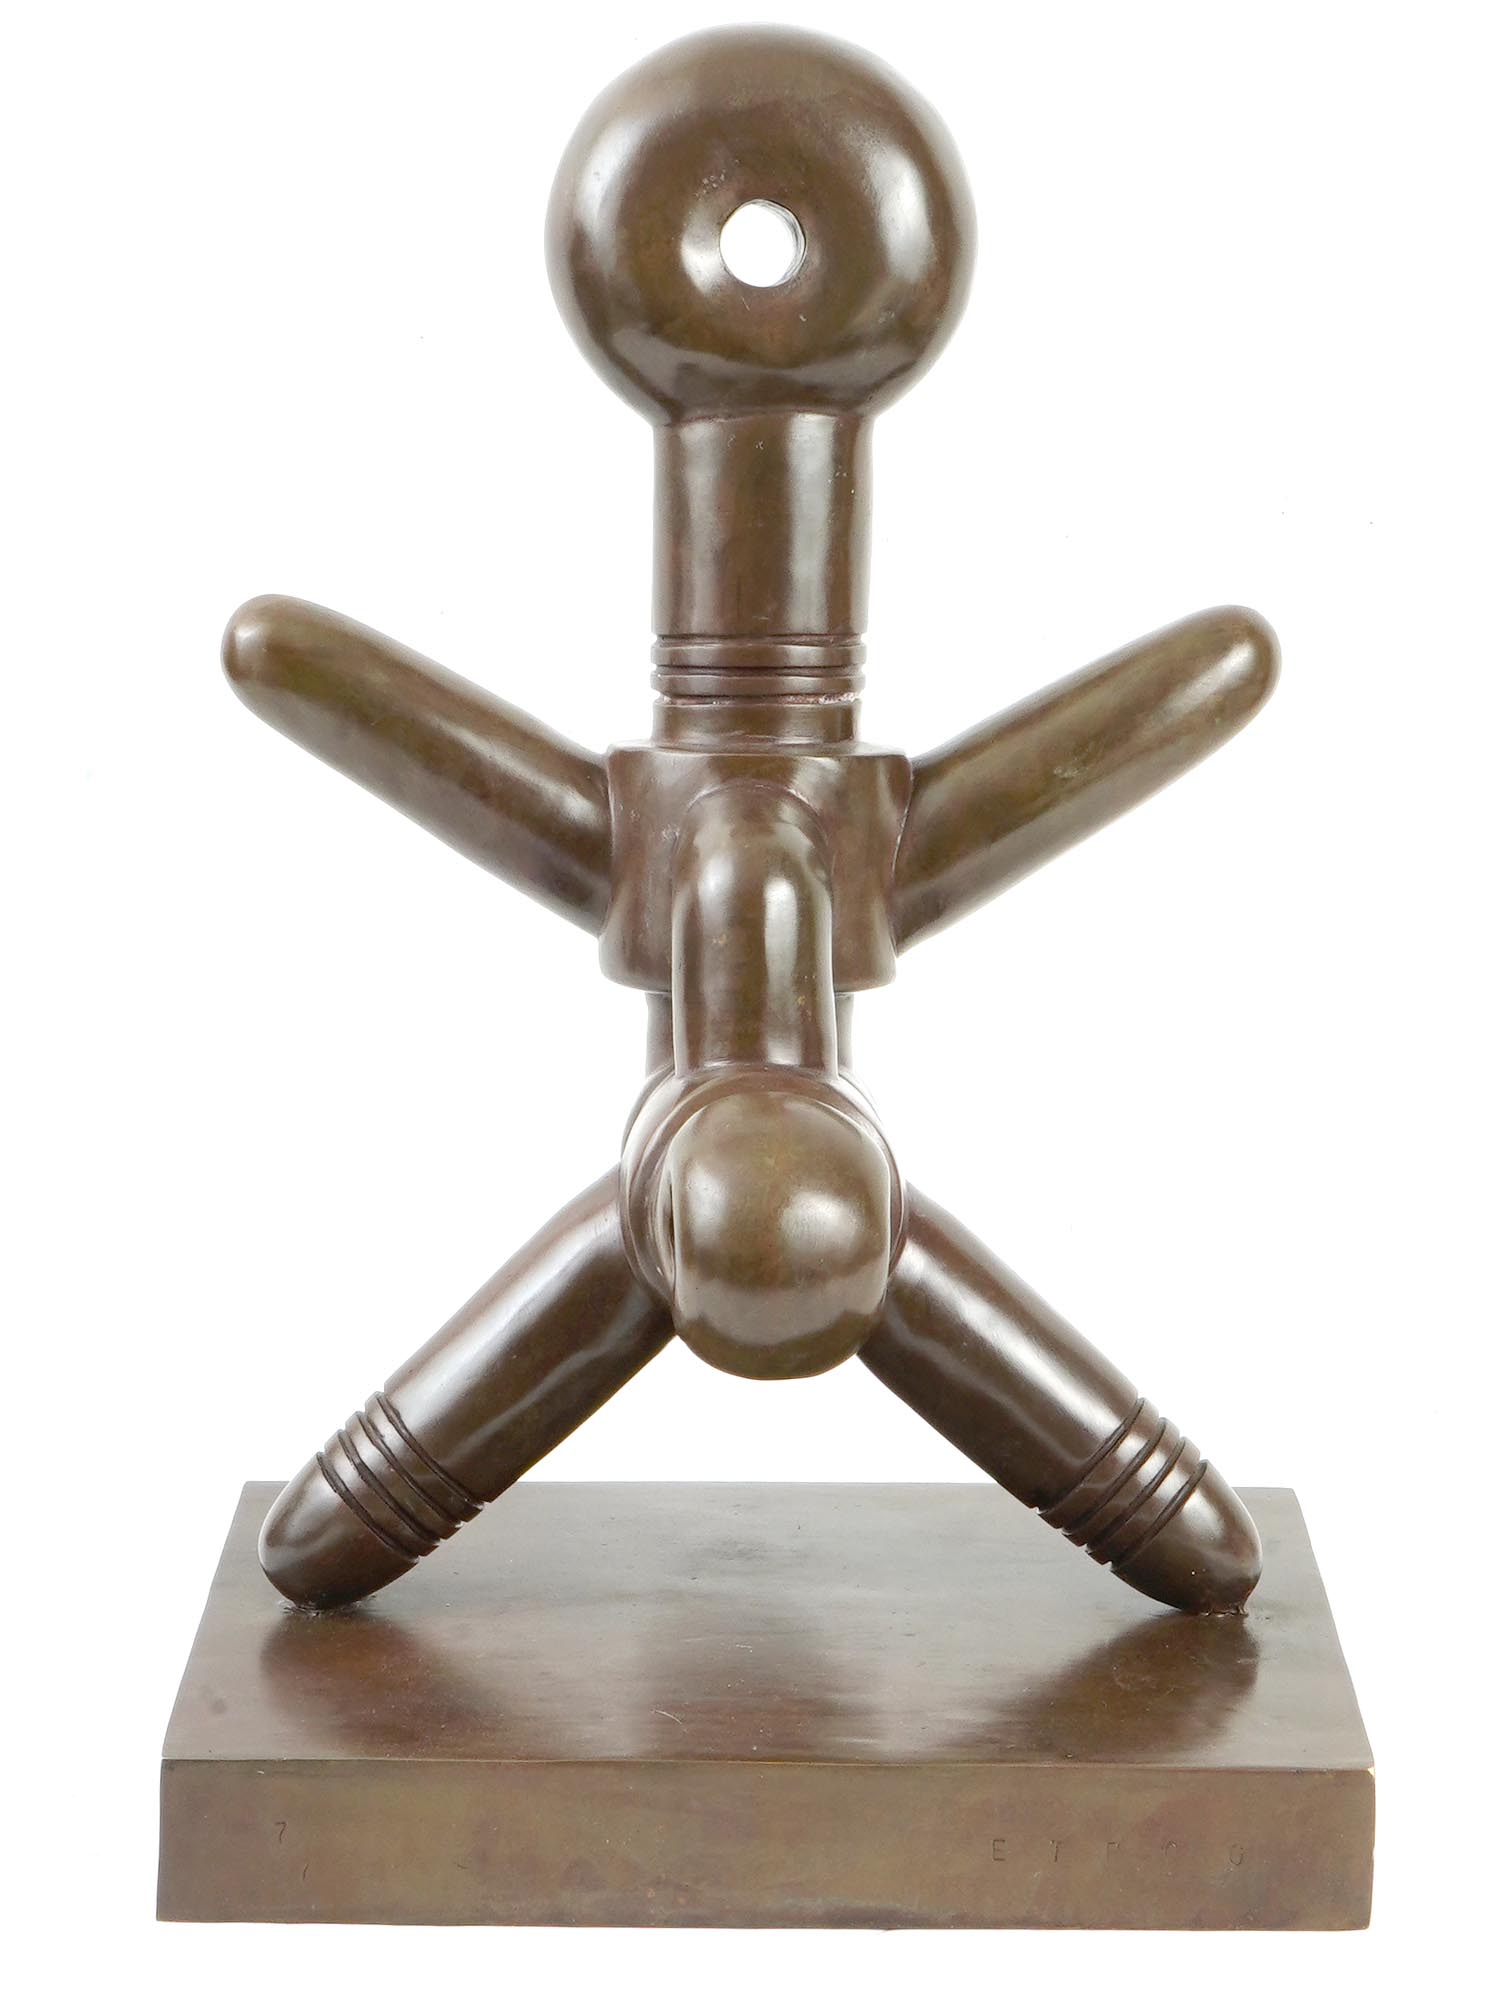 ABSTRACT BRONZE SCULPTURE BY SOREL ETROG CANADA PIC-2